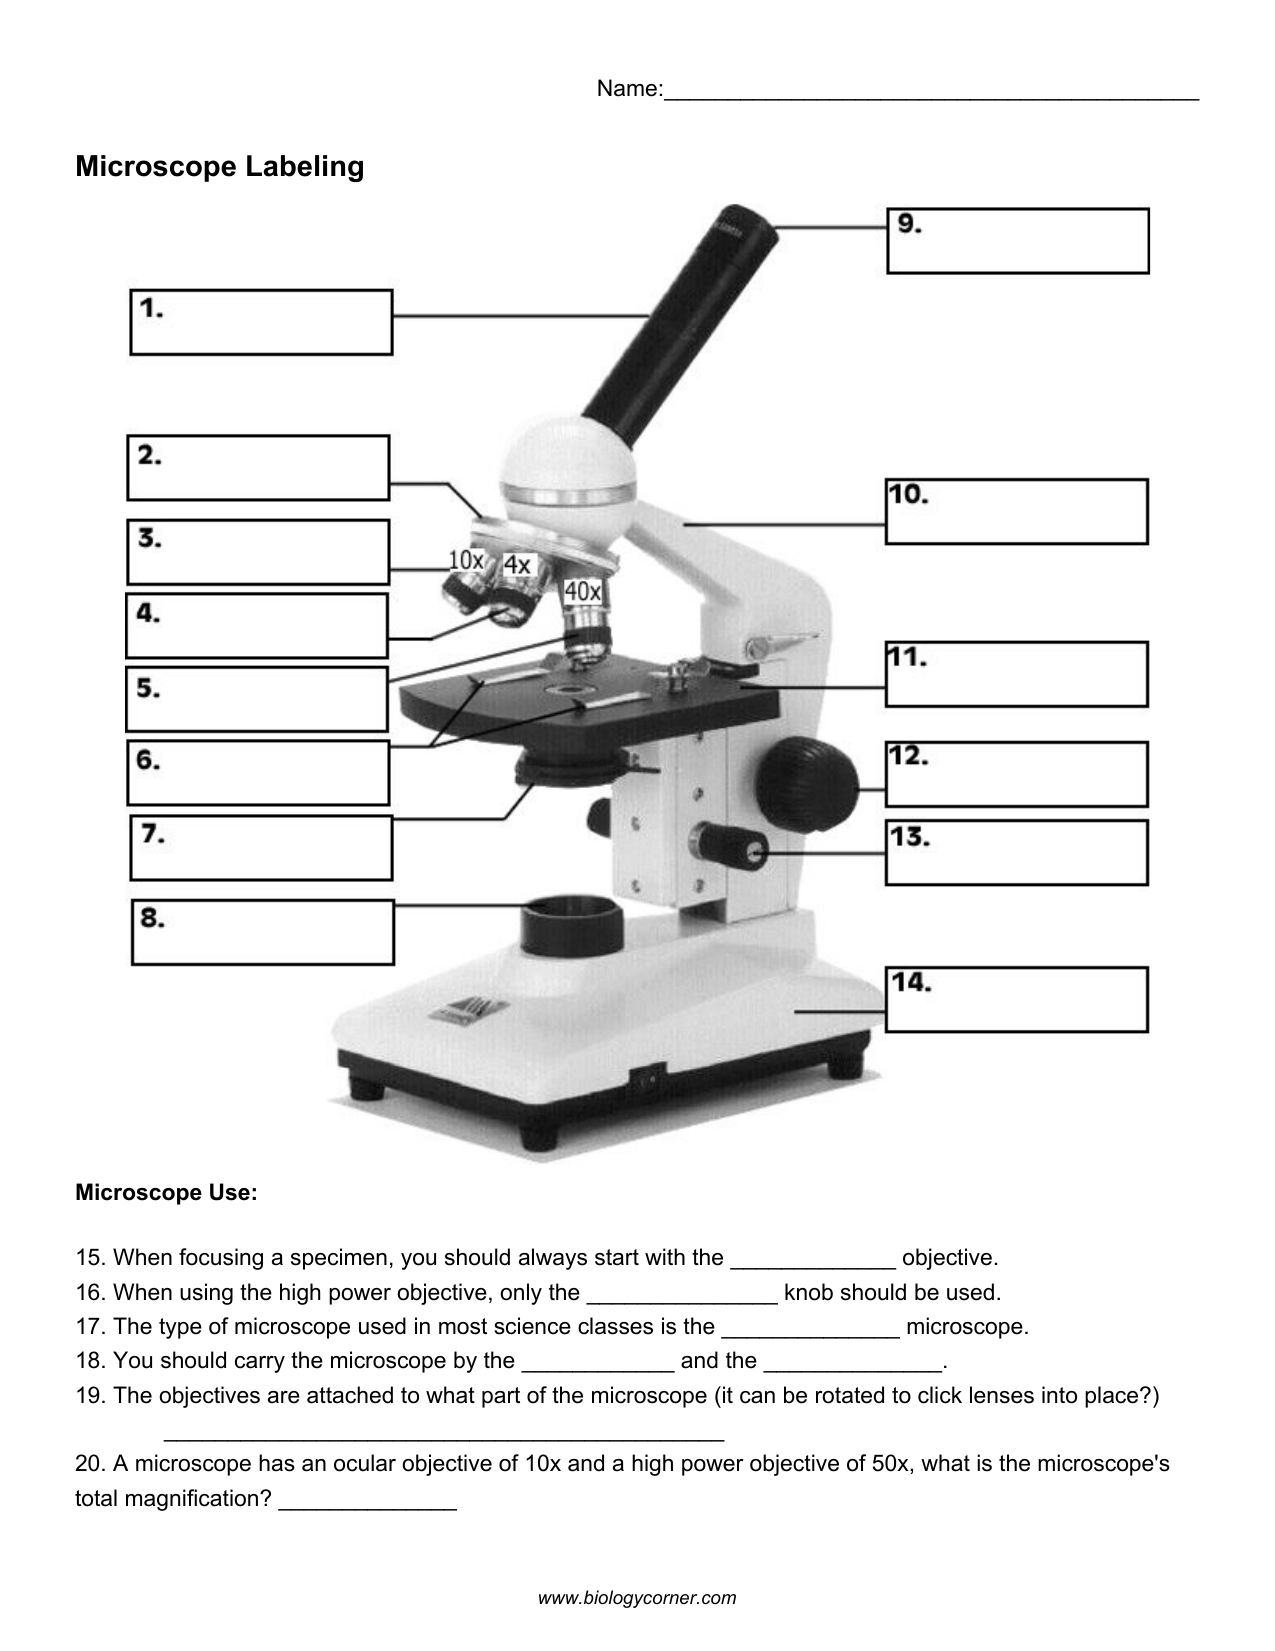 Microscope Parts Labeling Worksheet Intended For Microscope Parts And Use Worksheet